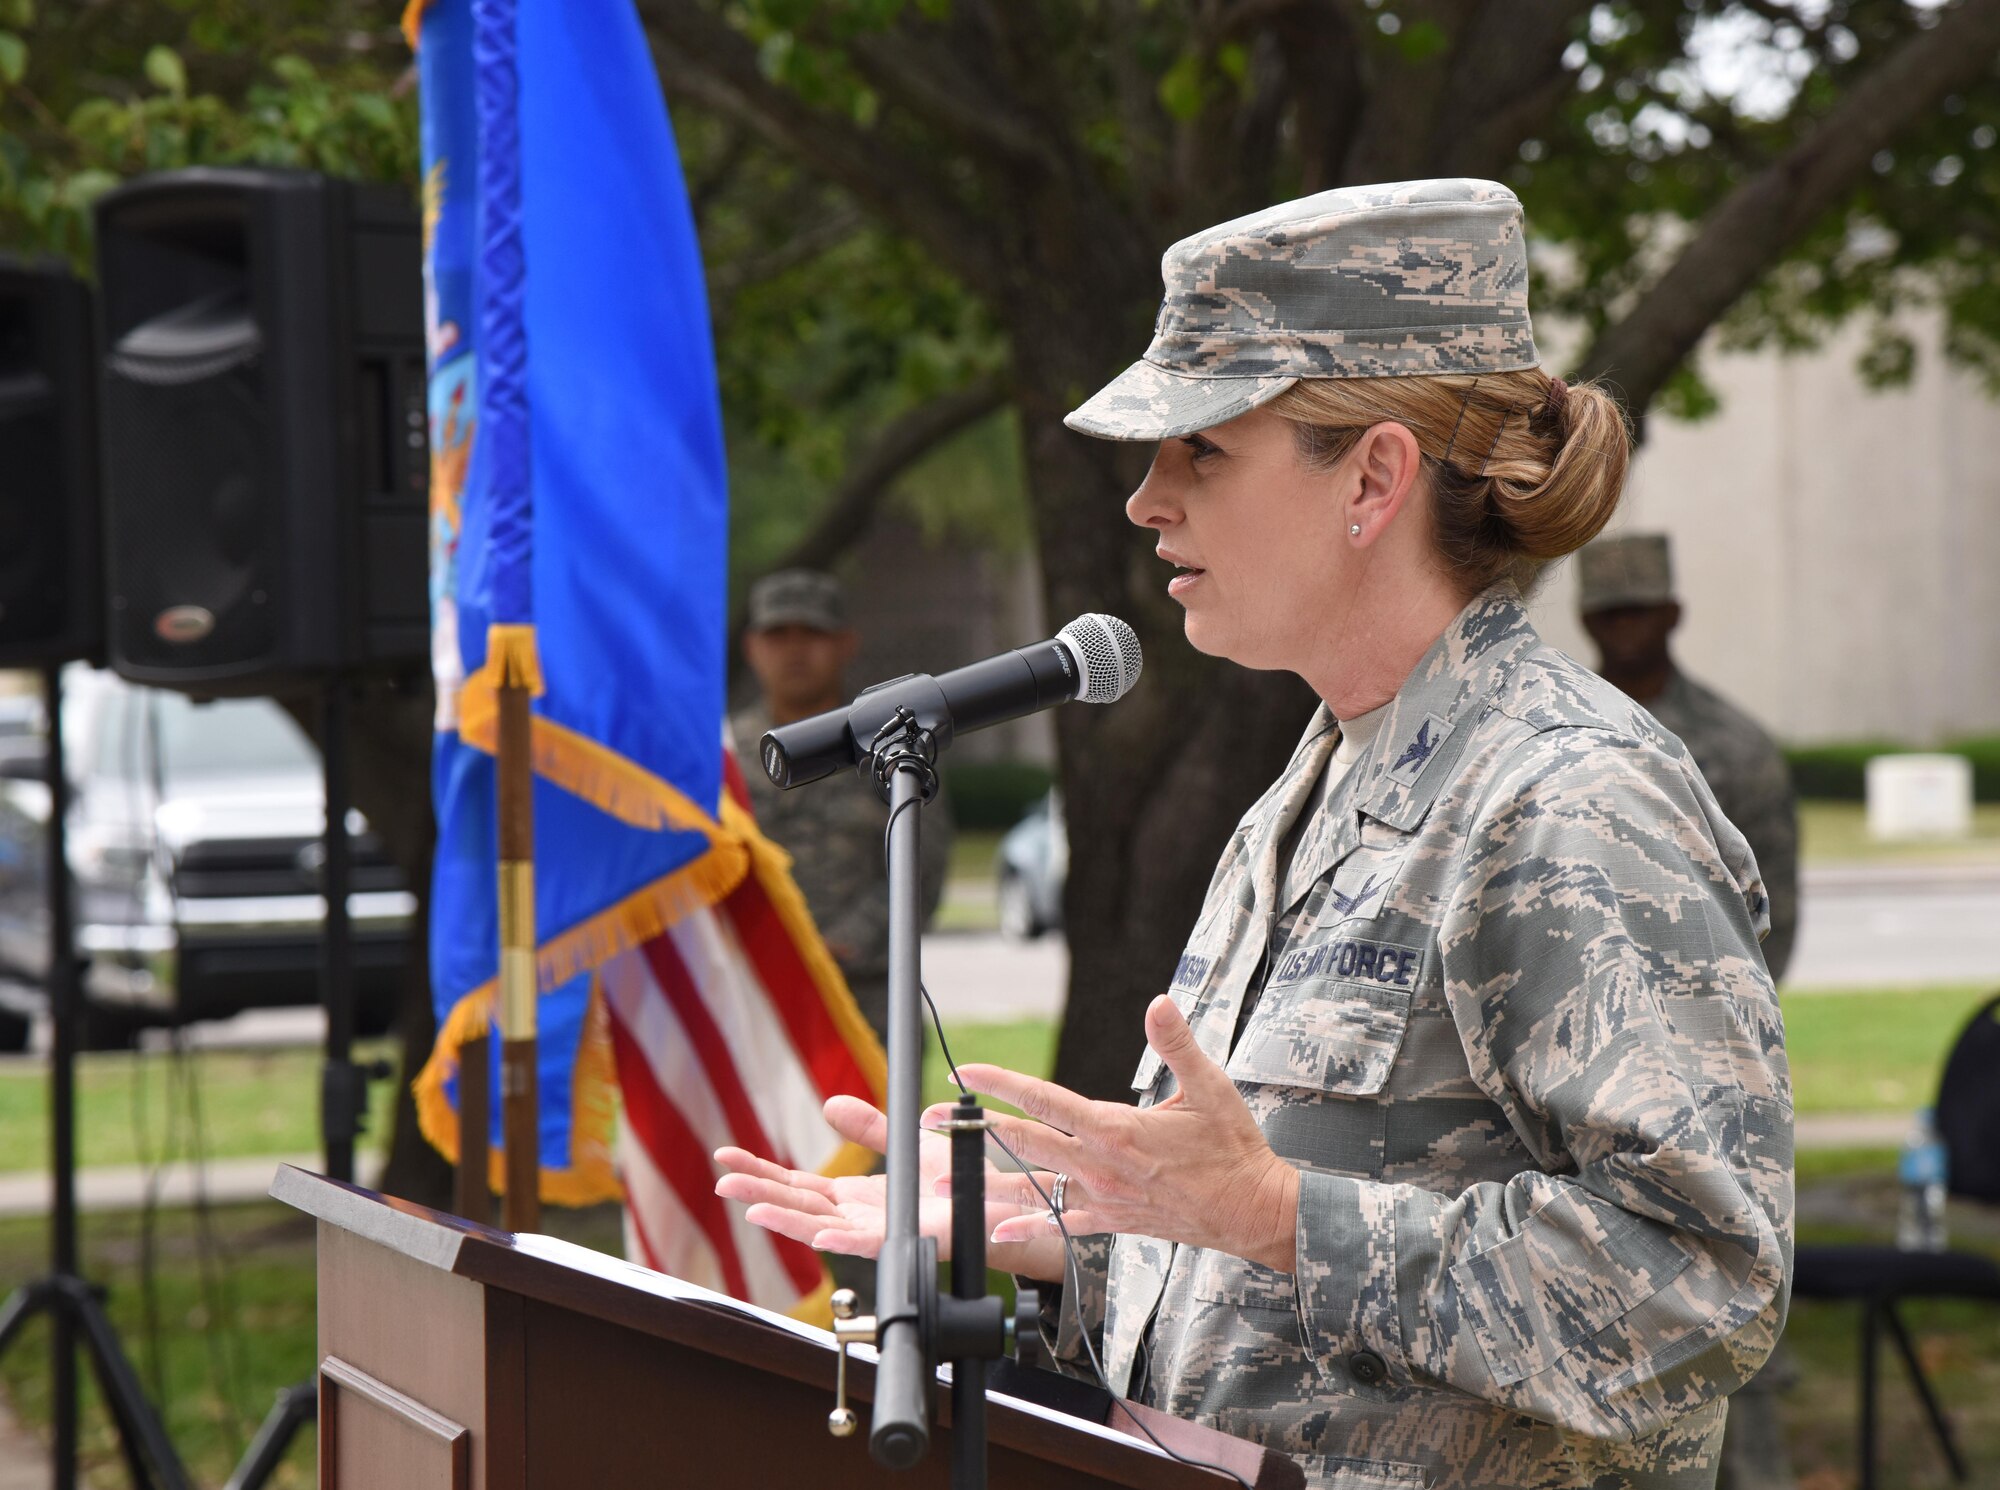 Col. Michele Edmondson, 81st Training Wing commander, delivers remarks during the Professional Development Center’s grand reopening and ribbon cutting ceremony May 17, 2017, on Keesler Air Force Base, Miss. The renovated facility offers developmental opportunities and various courses that fit the needs of officers, enlisted, civilians or reservists. (U.S. Air Force photo by Kemberly Groue)